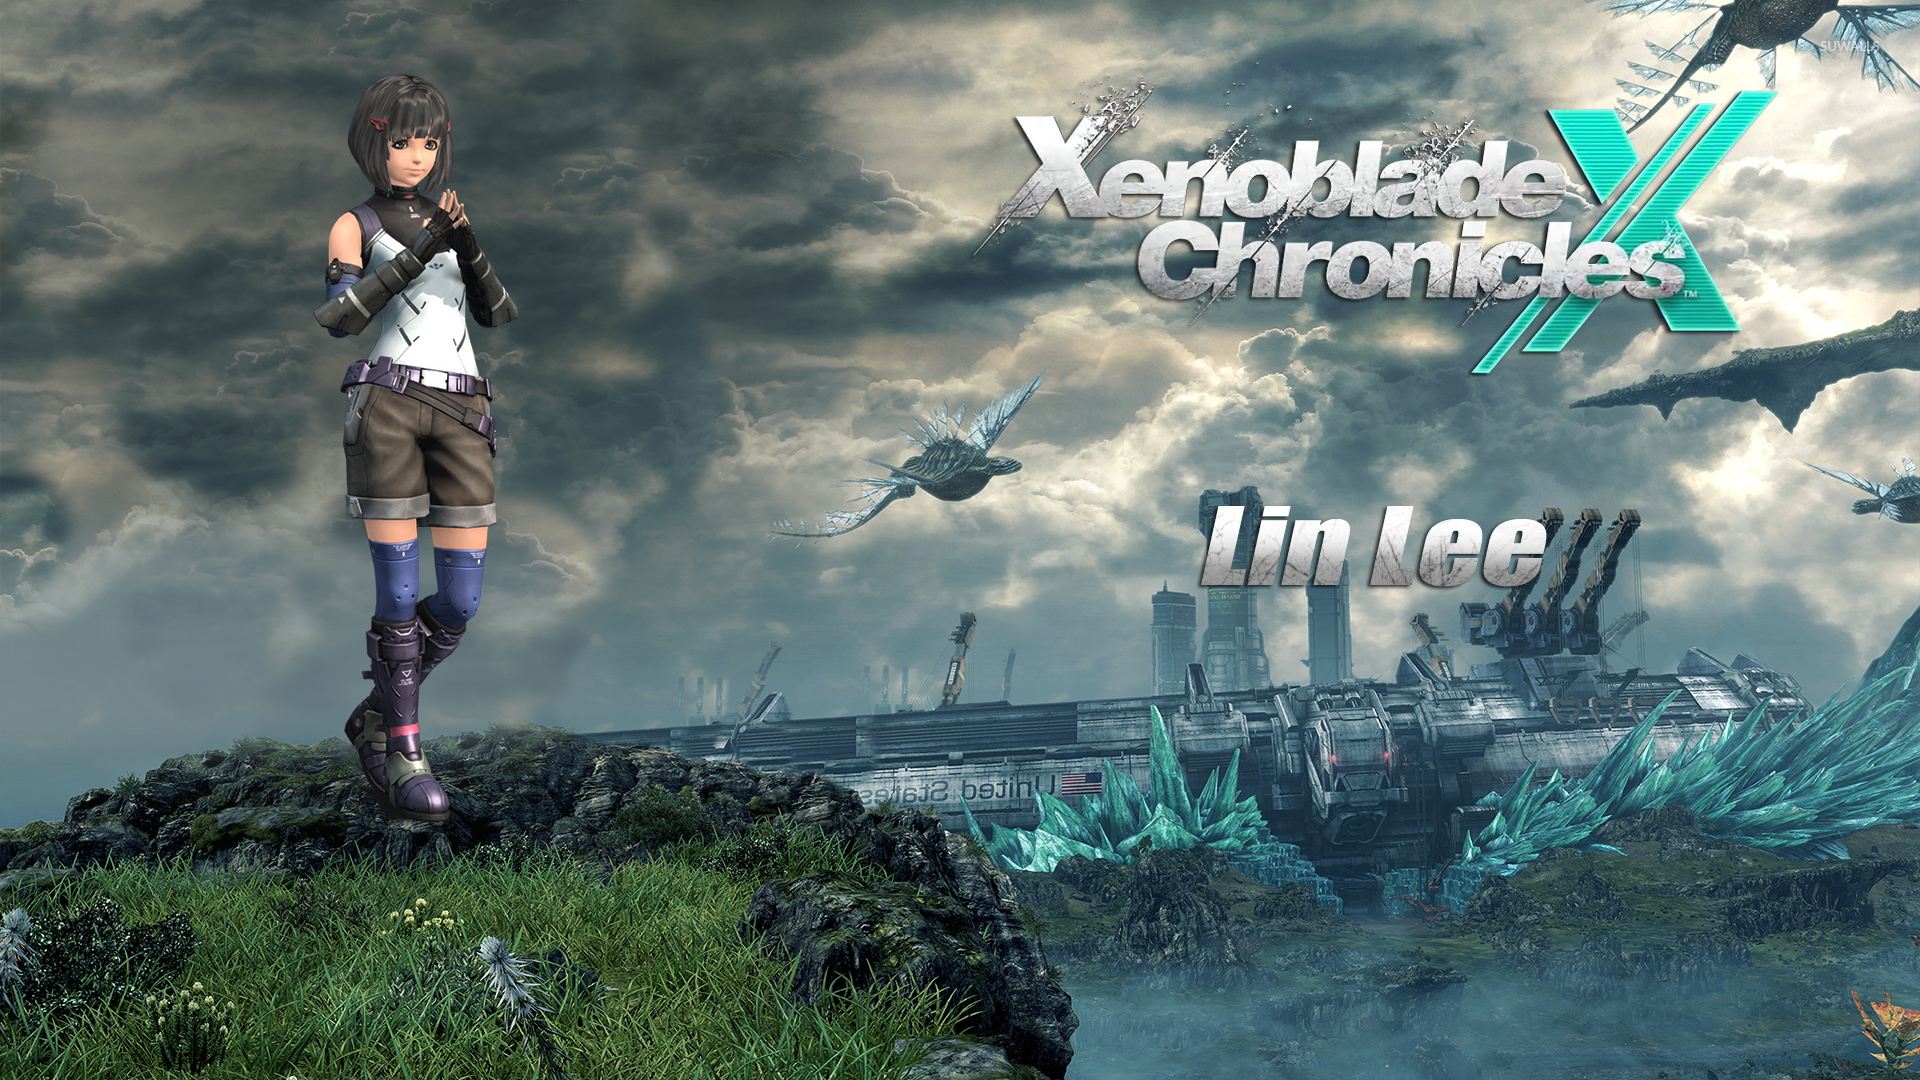 Lin Lee on a cliff - Xenoblade Chronicles X wallpaper.